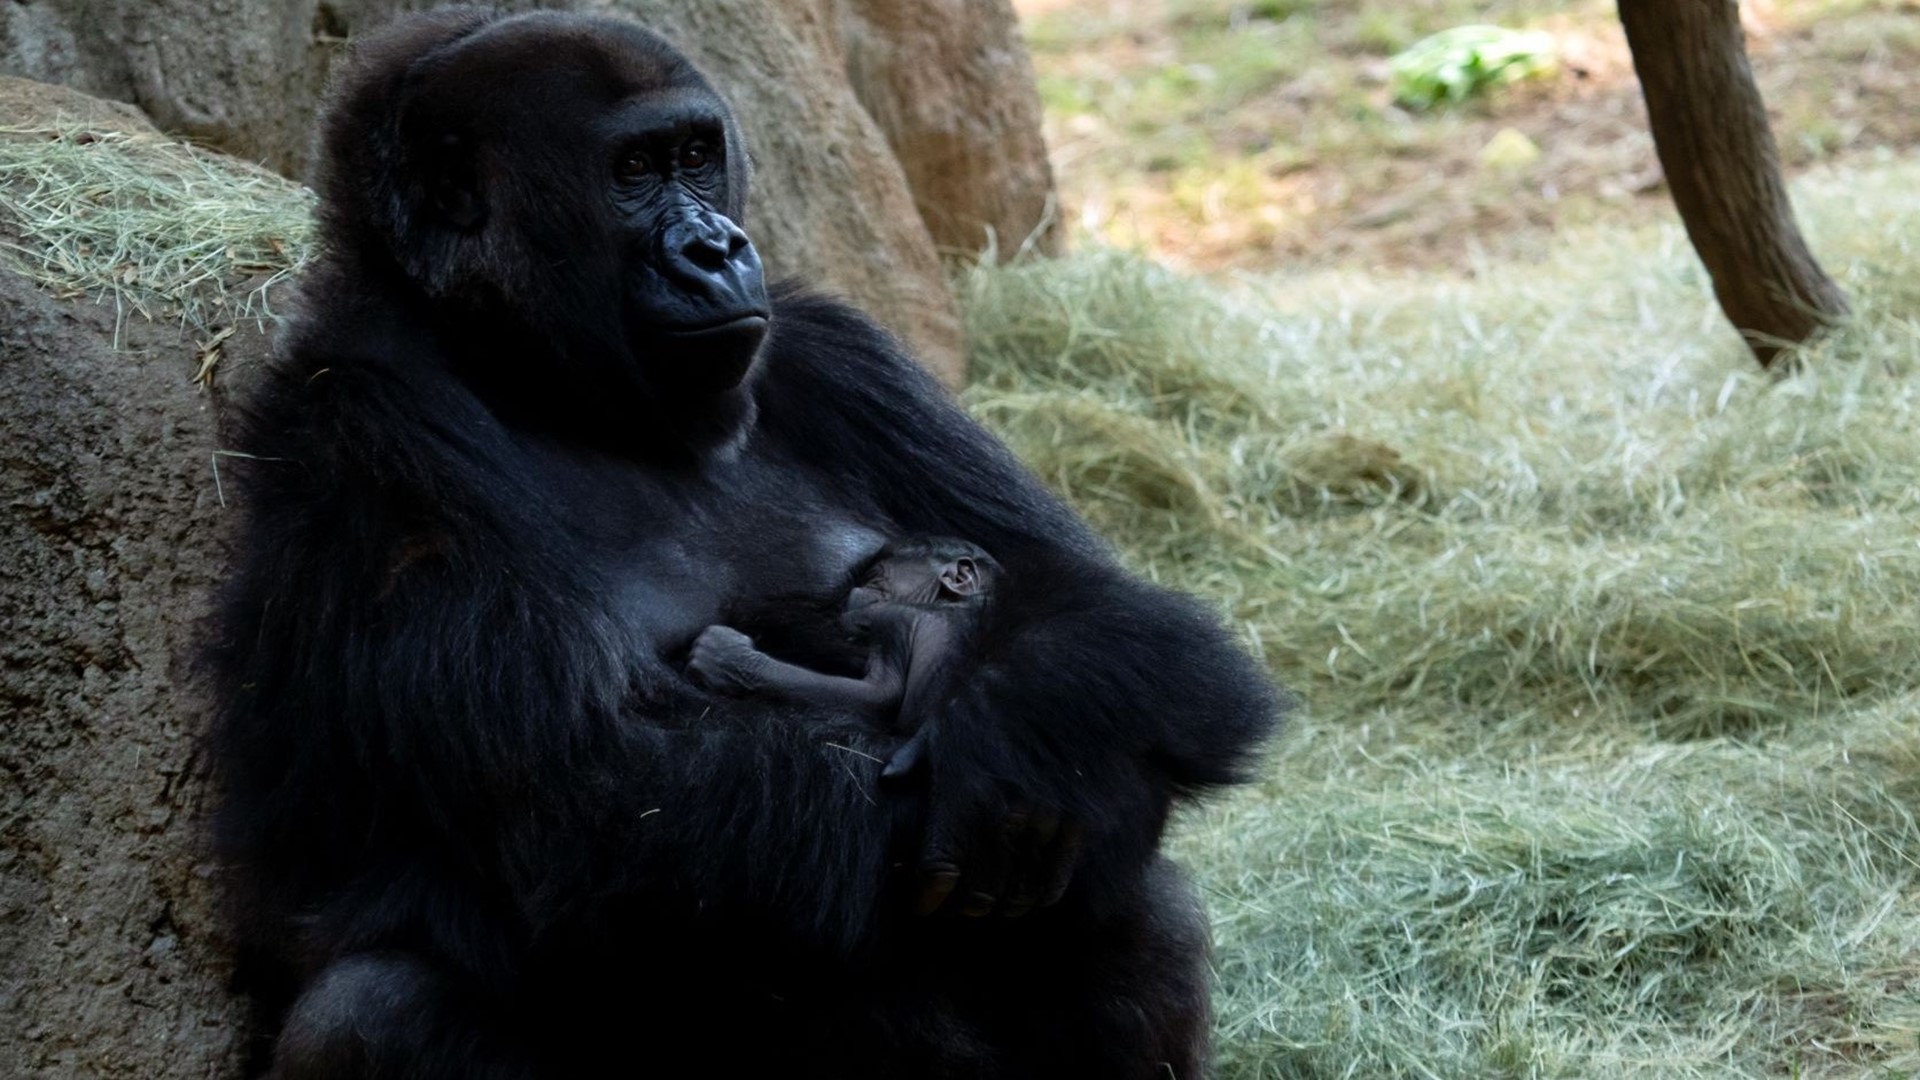 The baby gorilla was born last week at the zoo to Lulu, a 19-year-old western lowland gorilla.